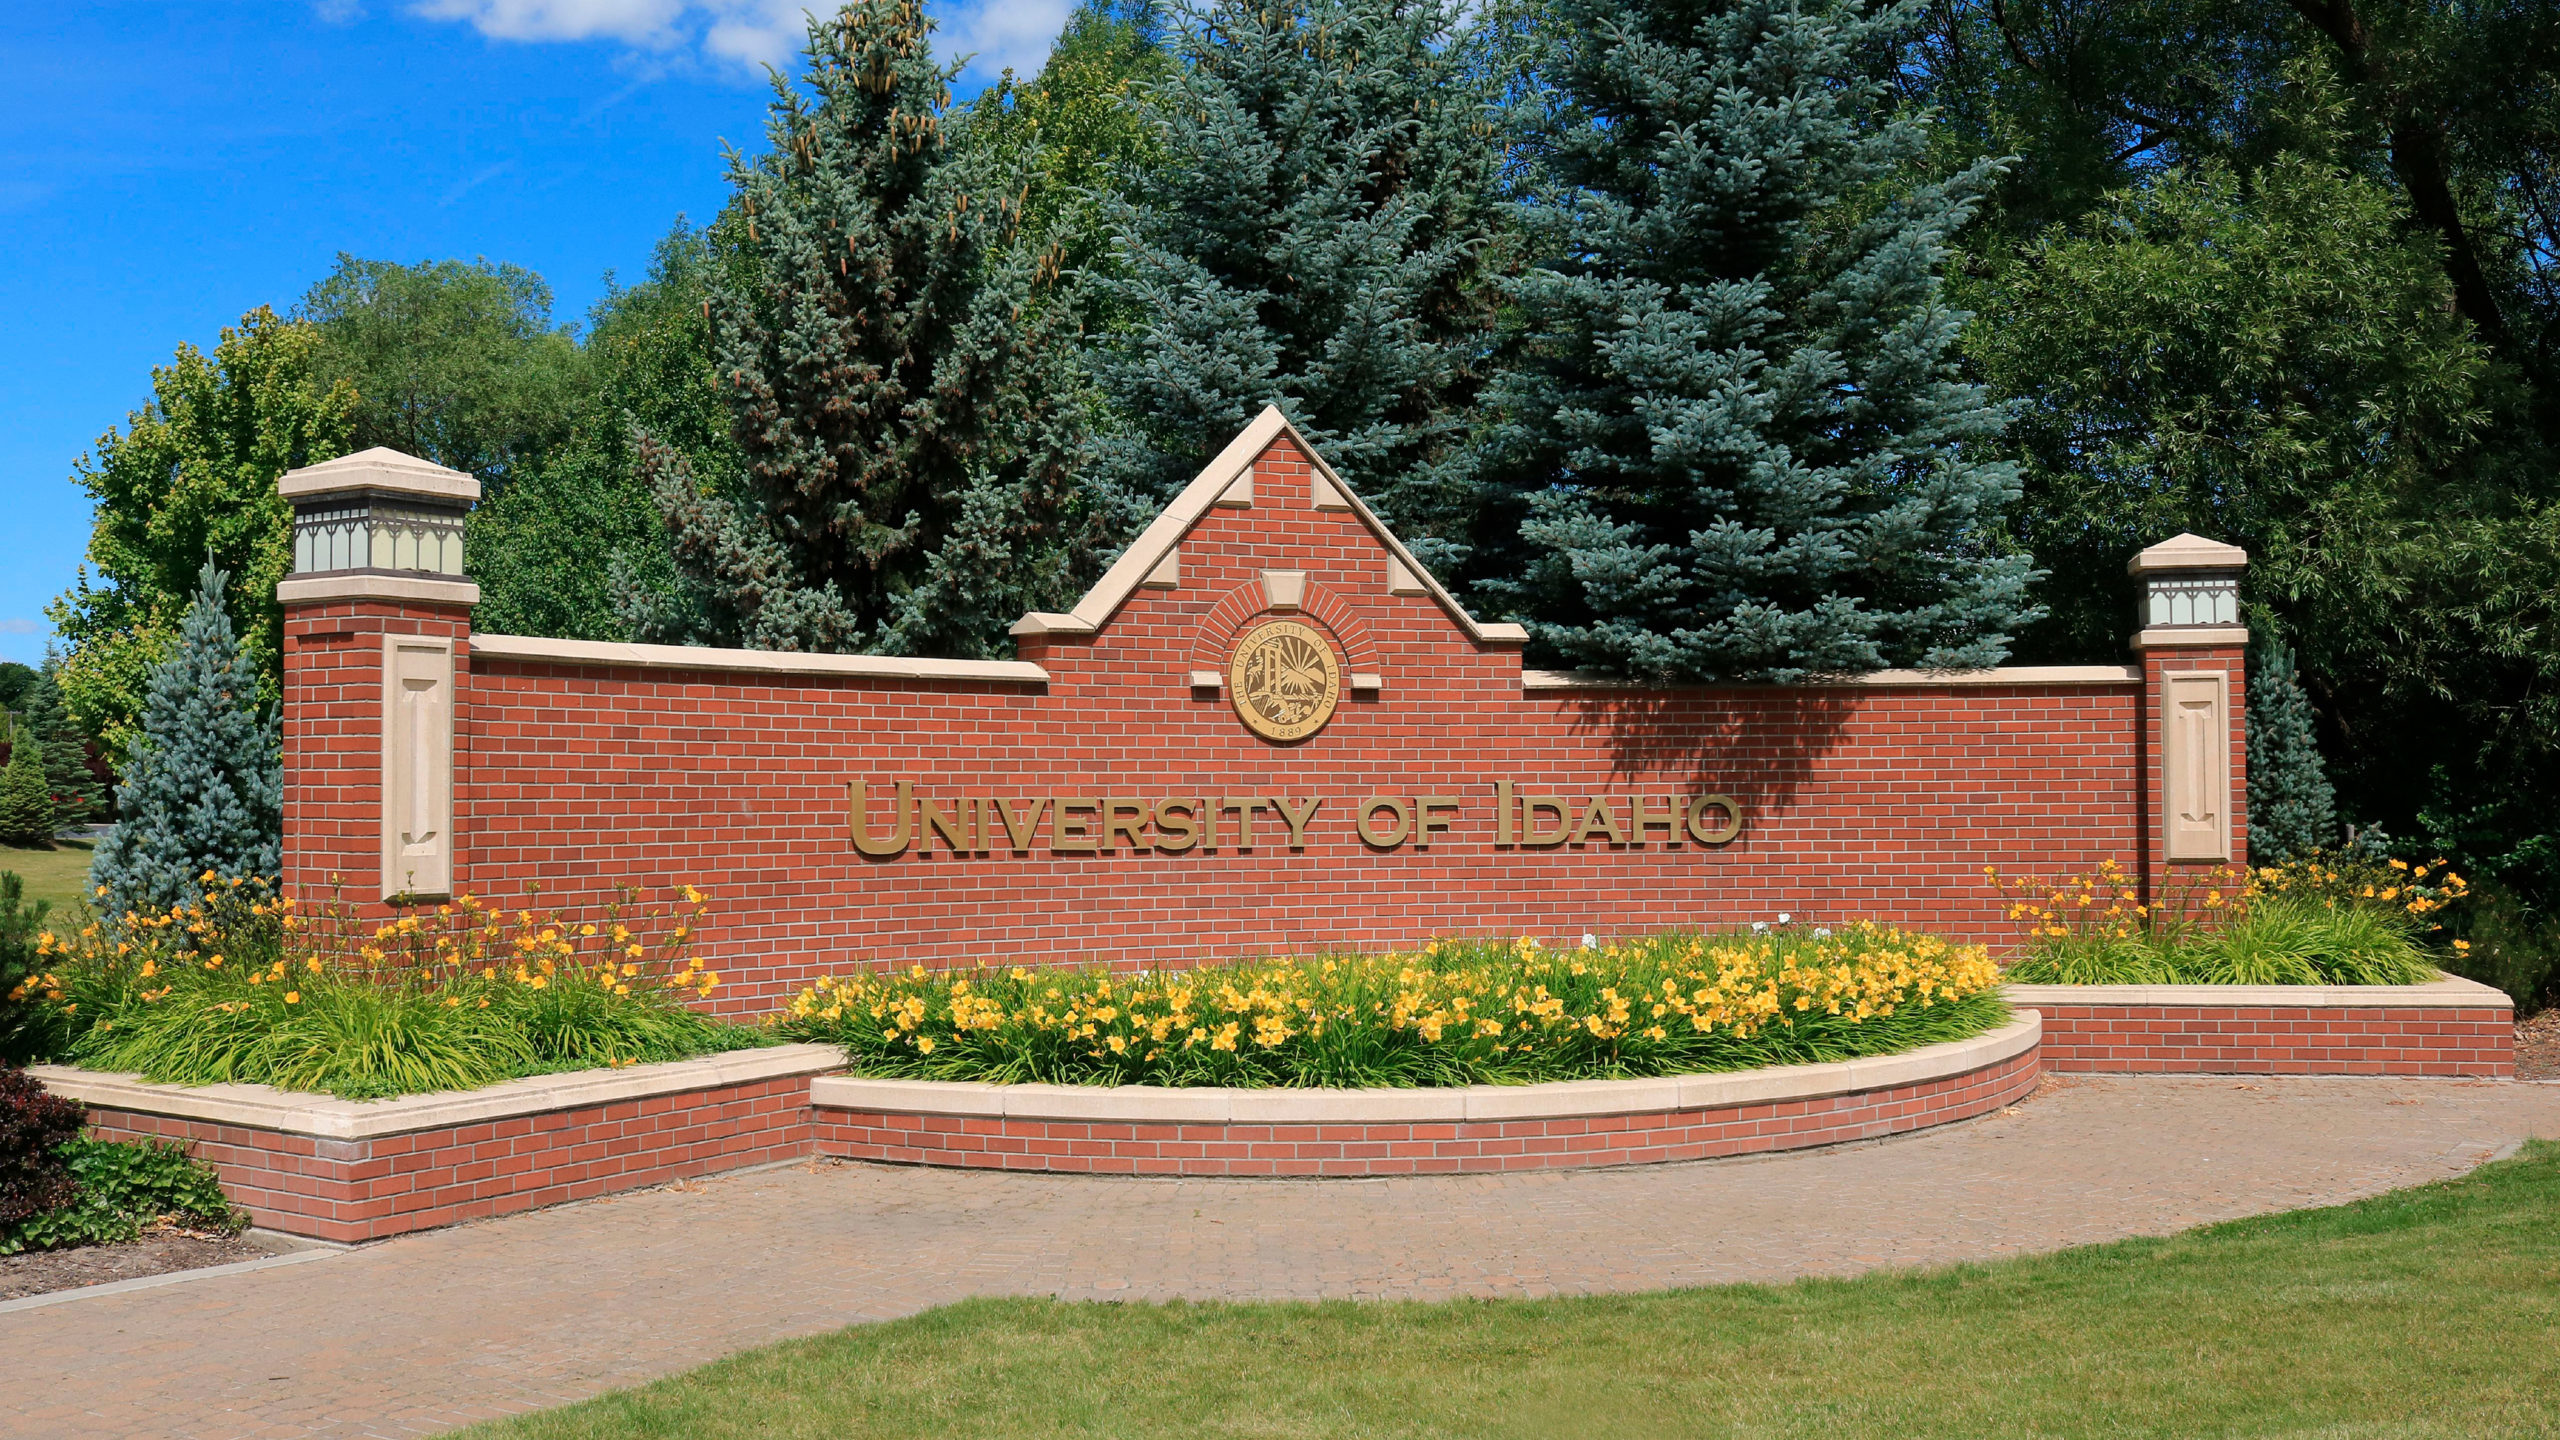 The bodies of four people believed to be students at the University of Idaho were found by police n...